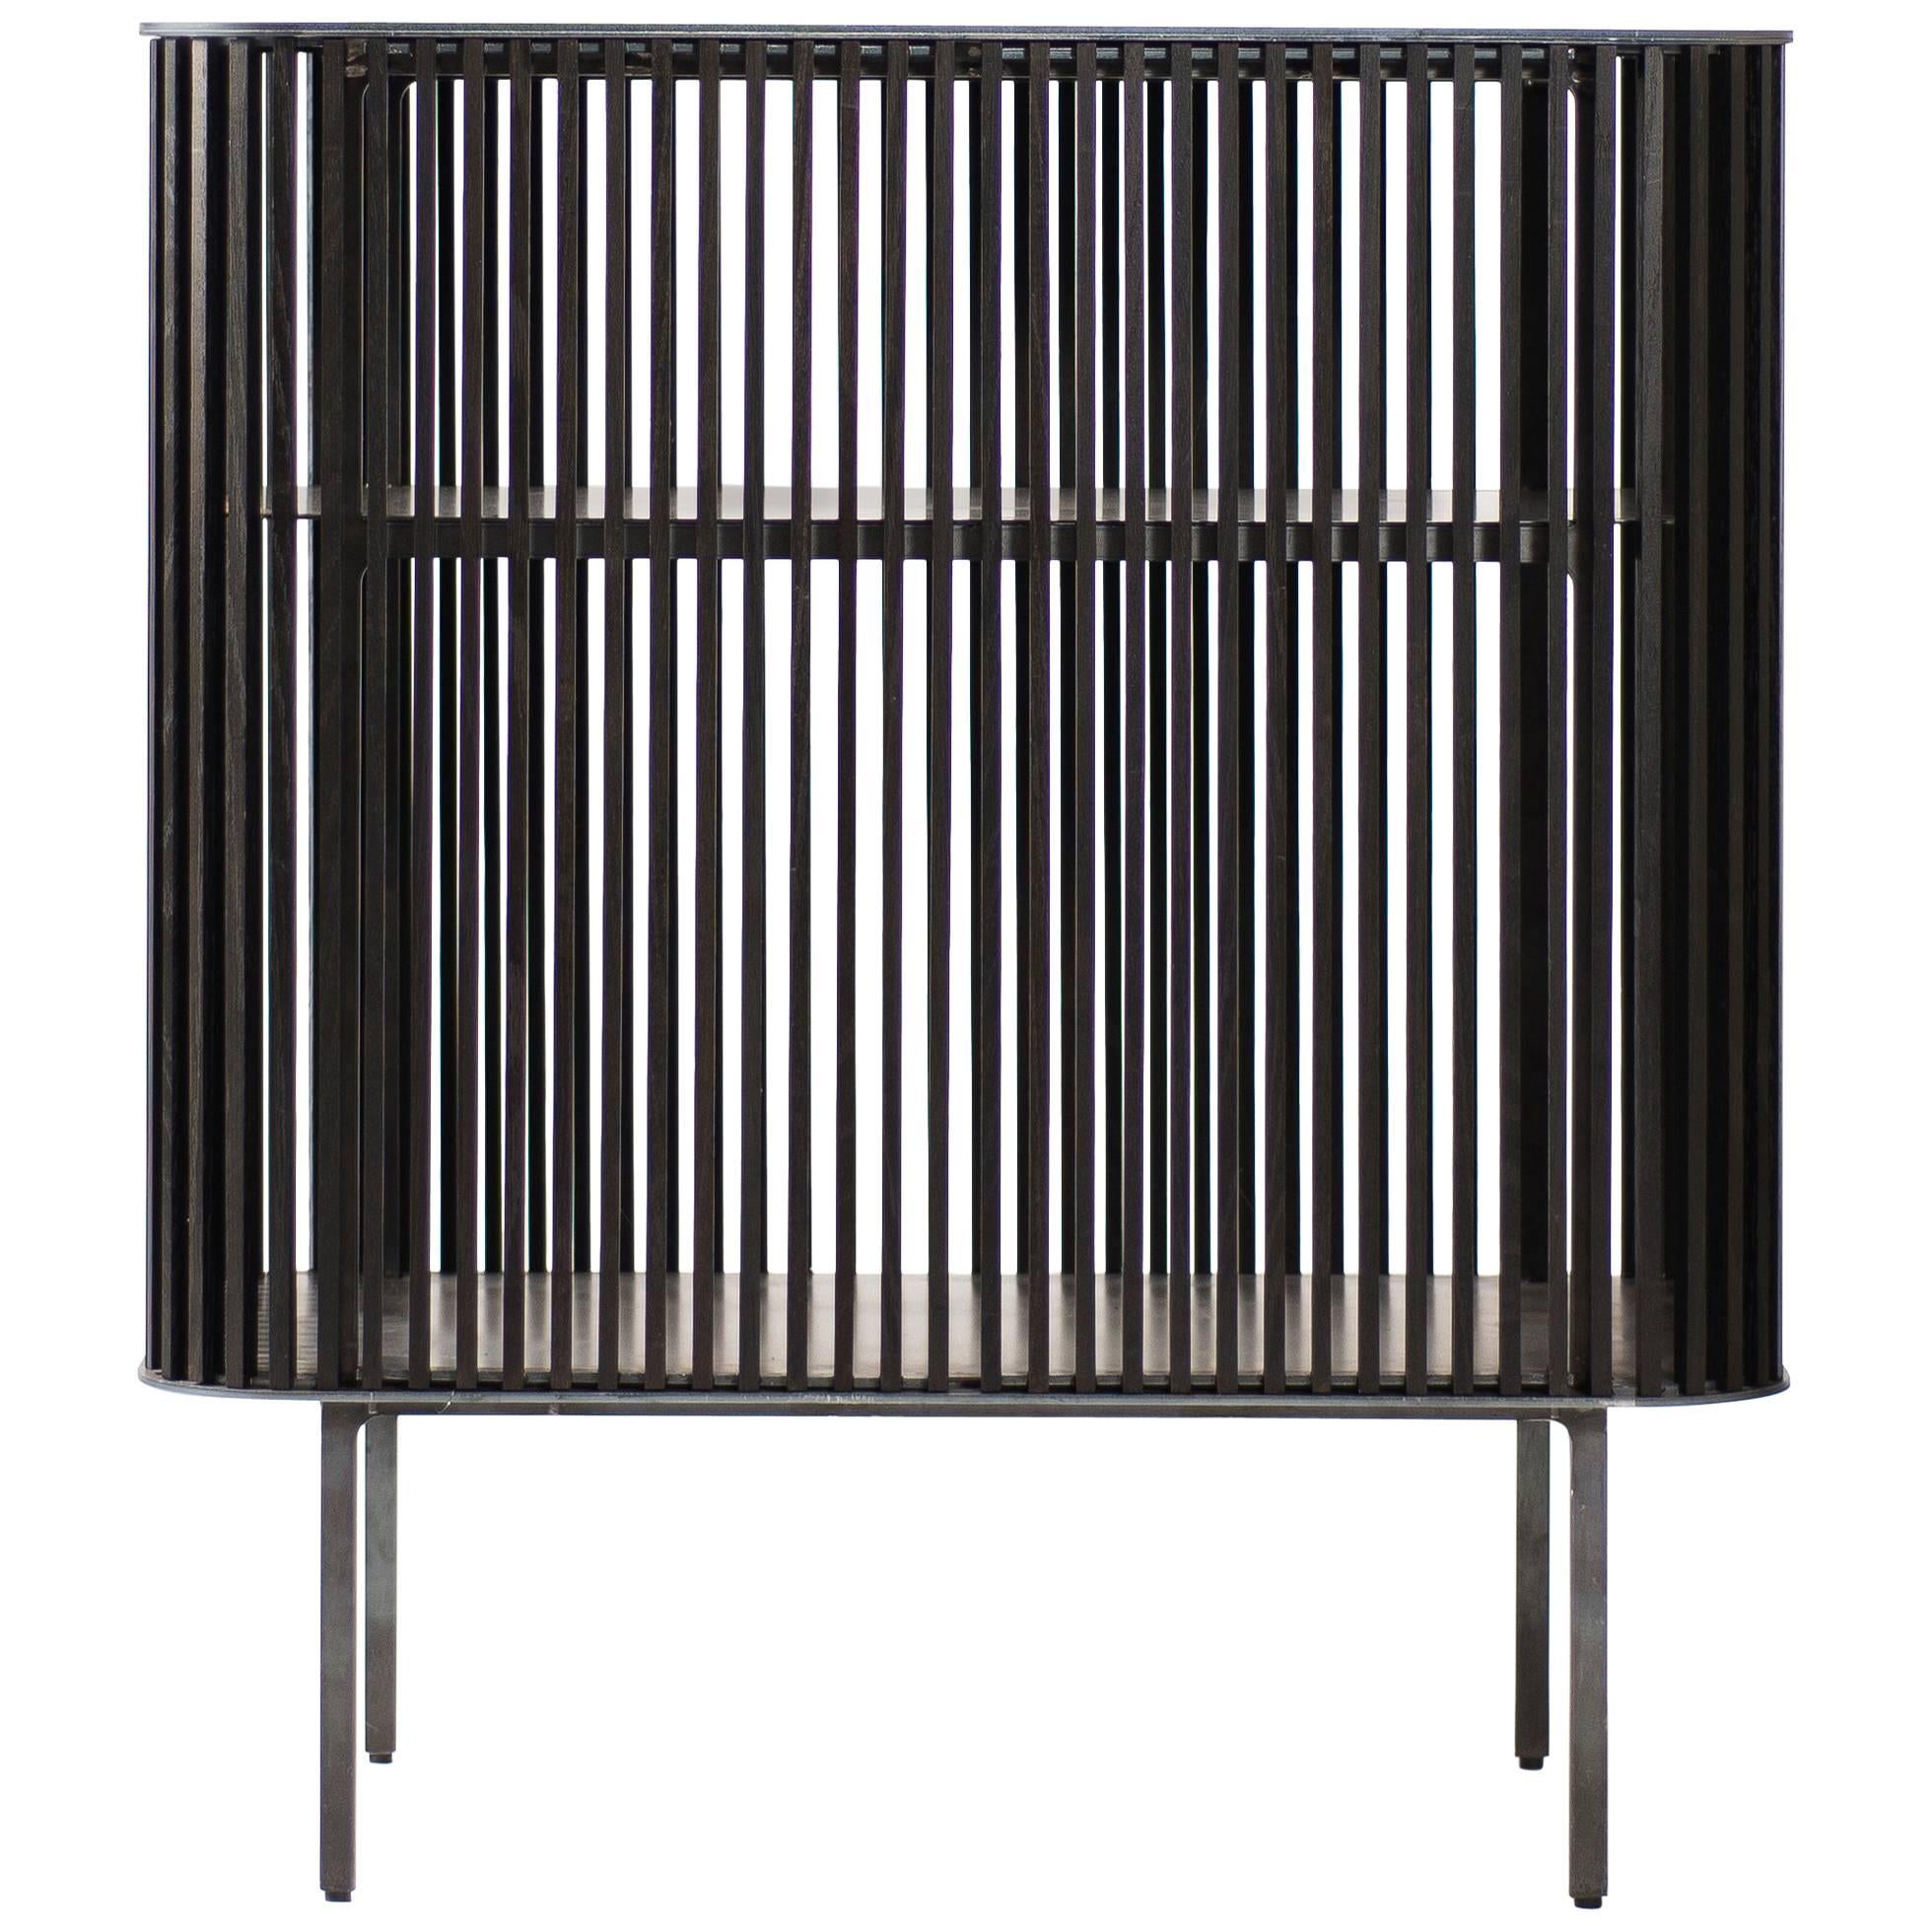 Dry Bar in Oiled Laser-Cut Steel Frame with Black Oak Slats and Leather Top